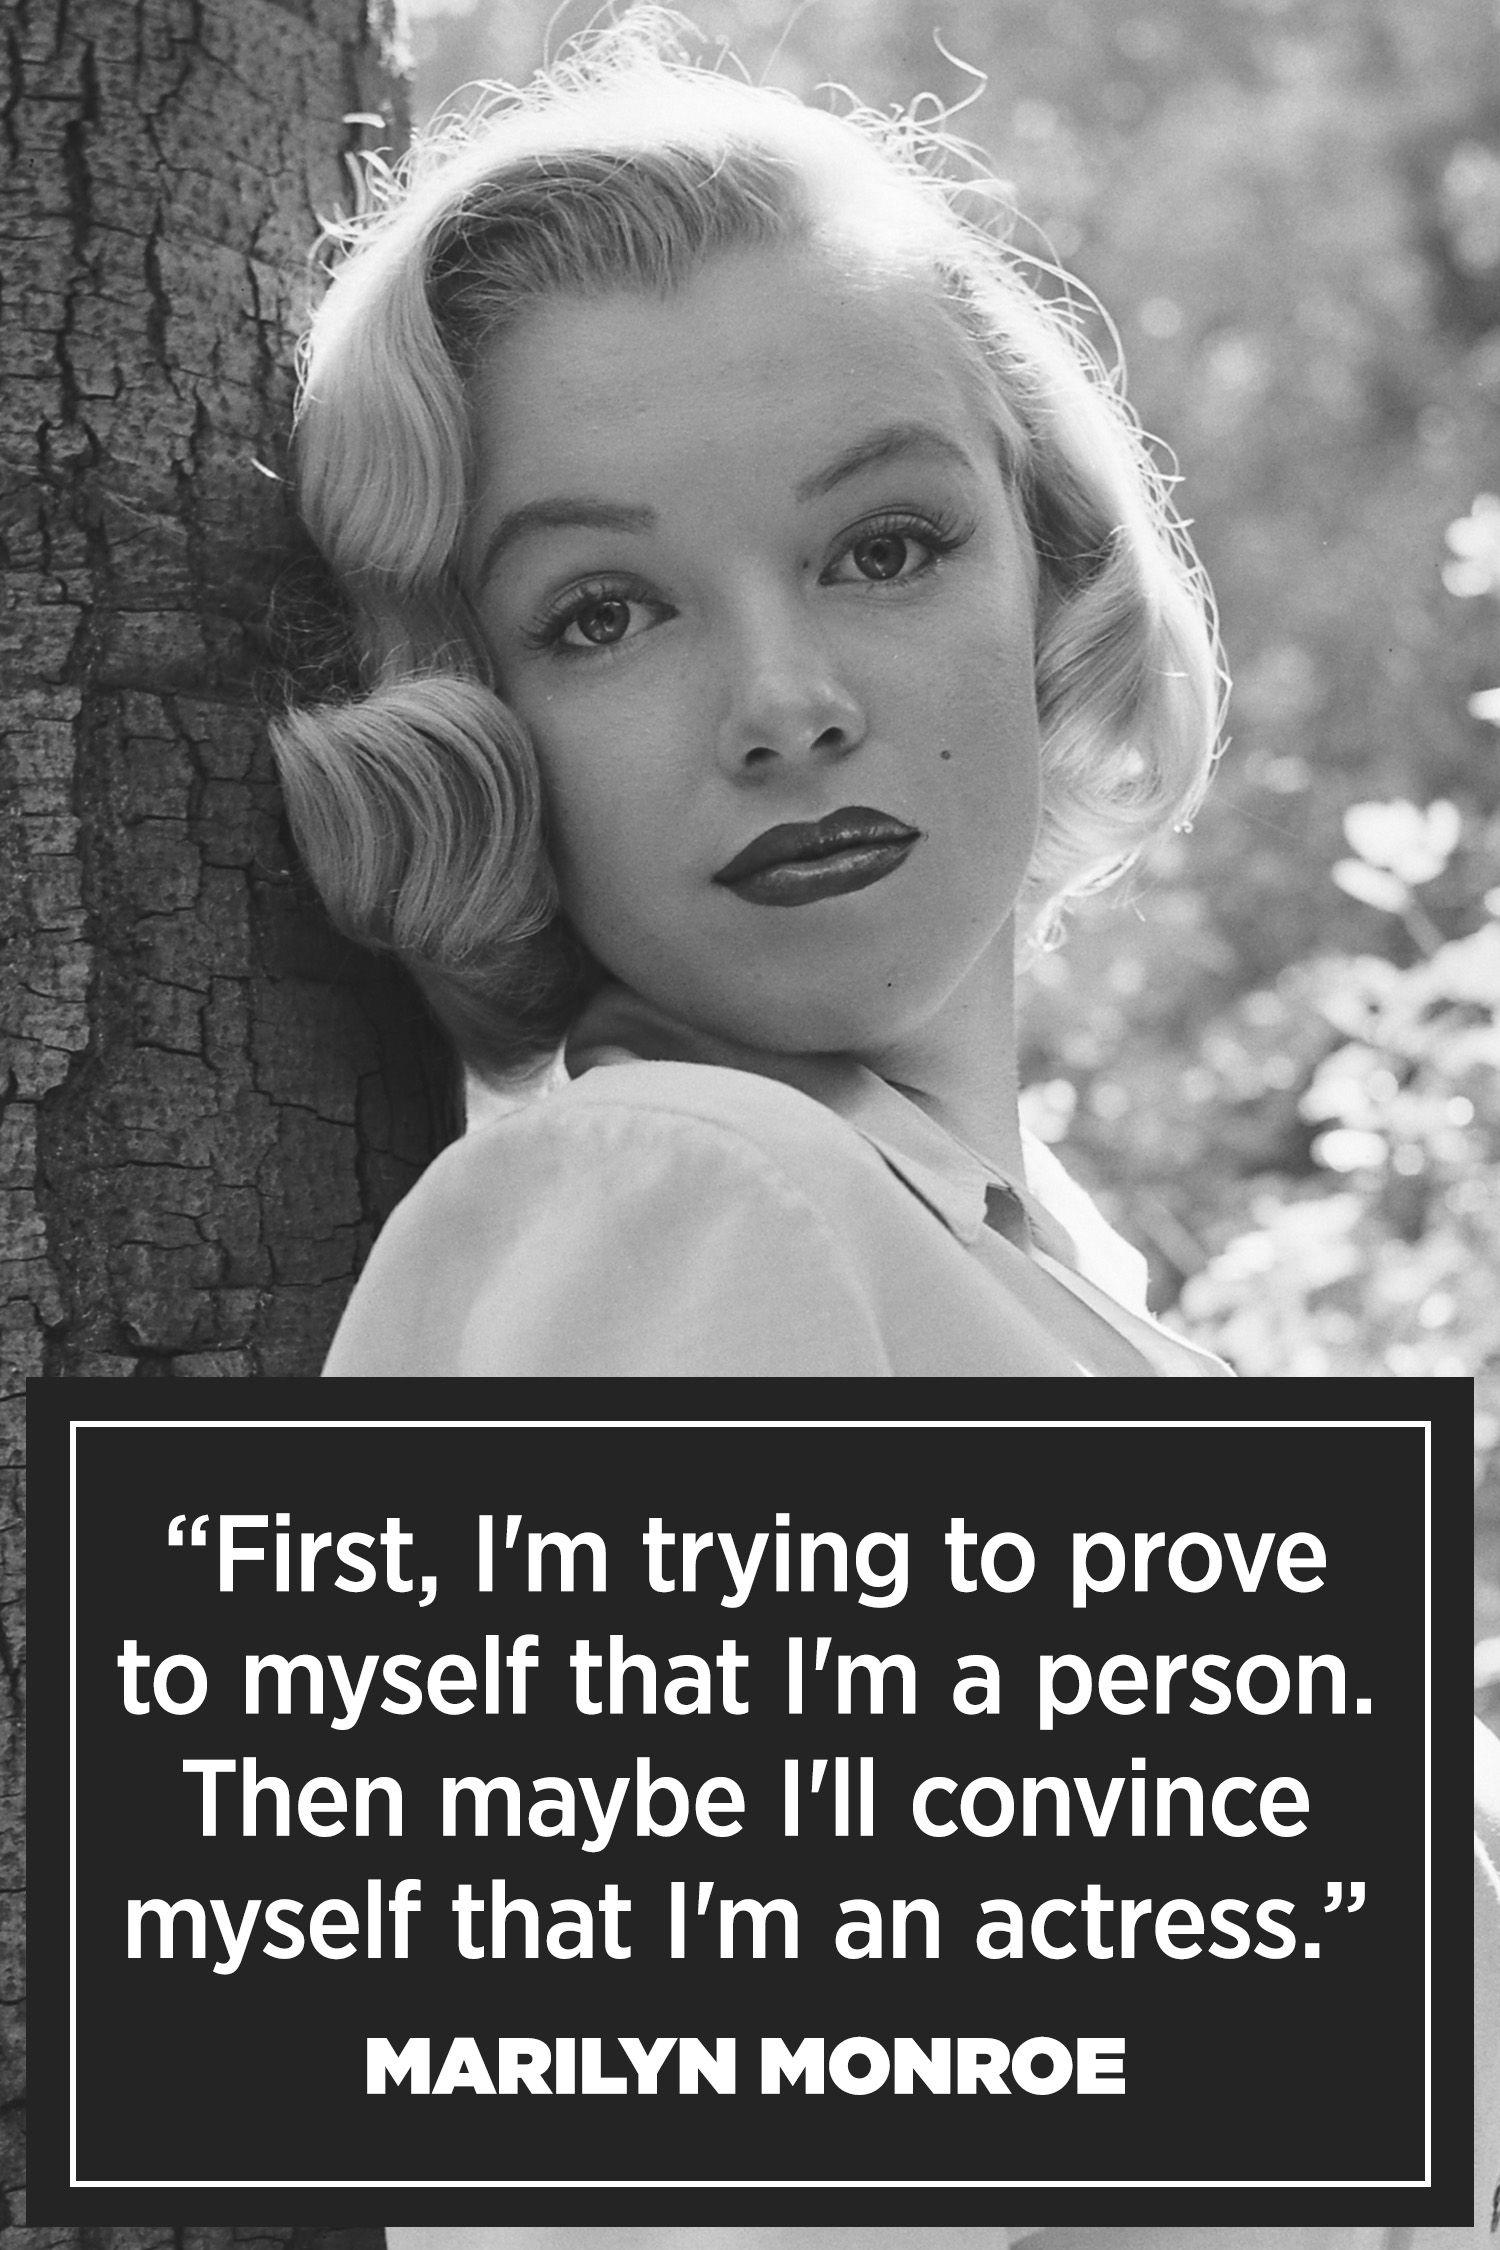 hbz quote marilyn20